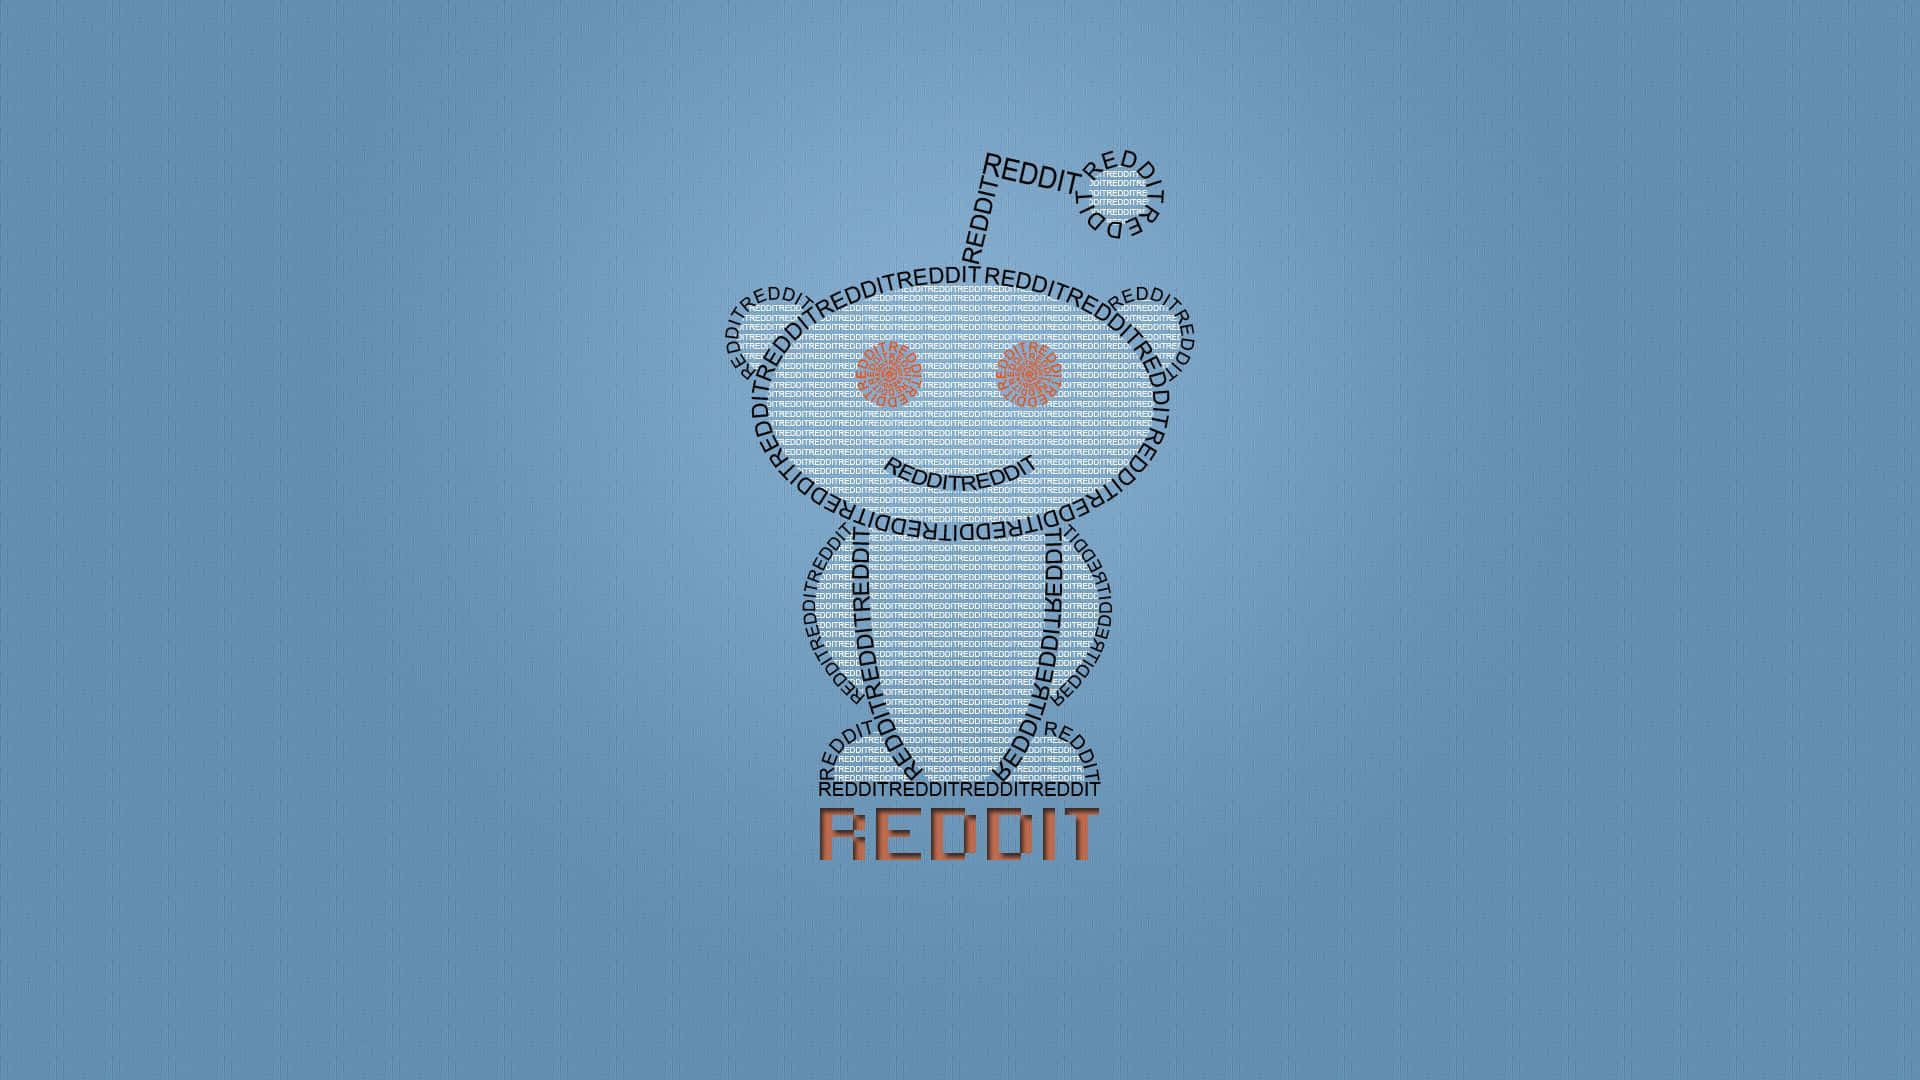 Get Interesting News and Insights On Reddit